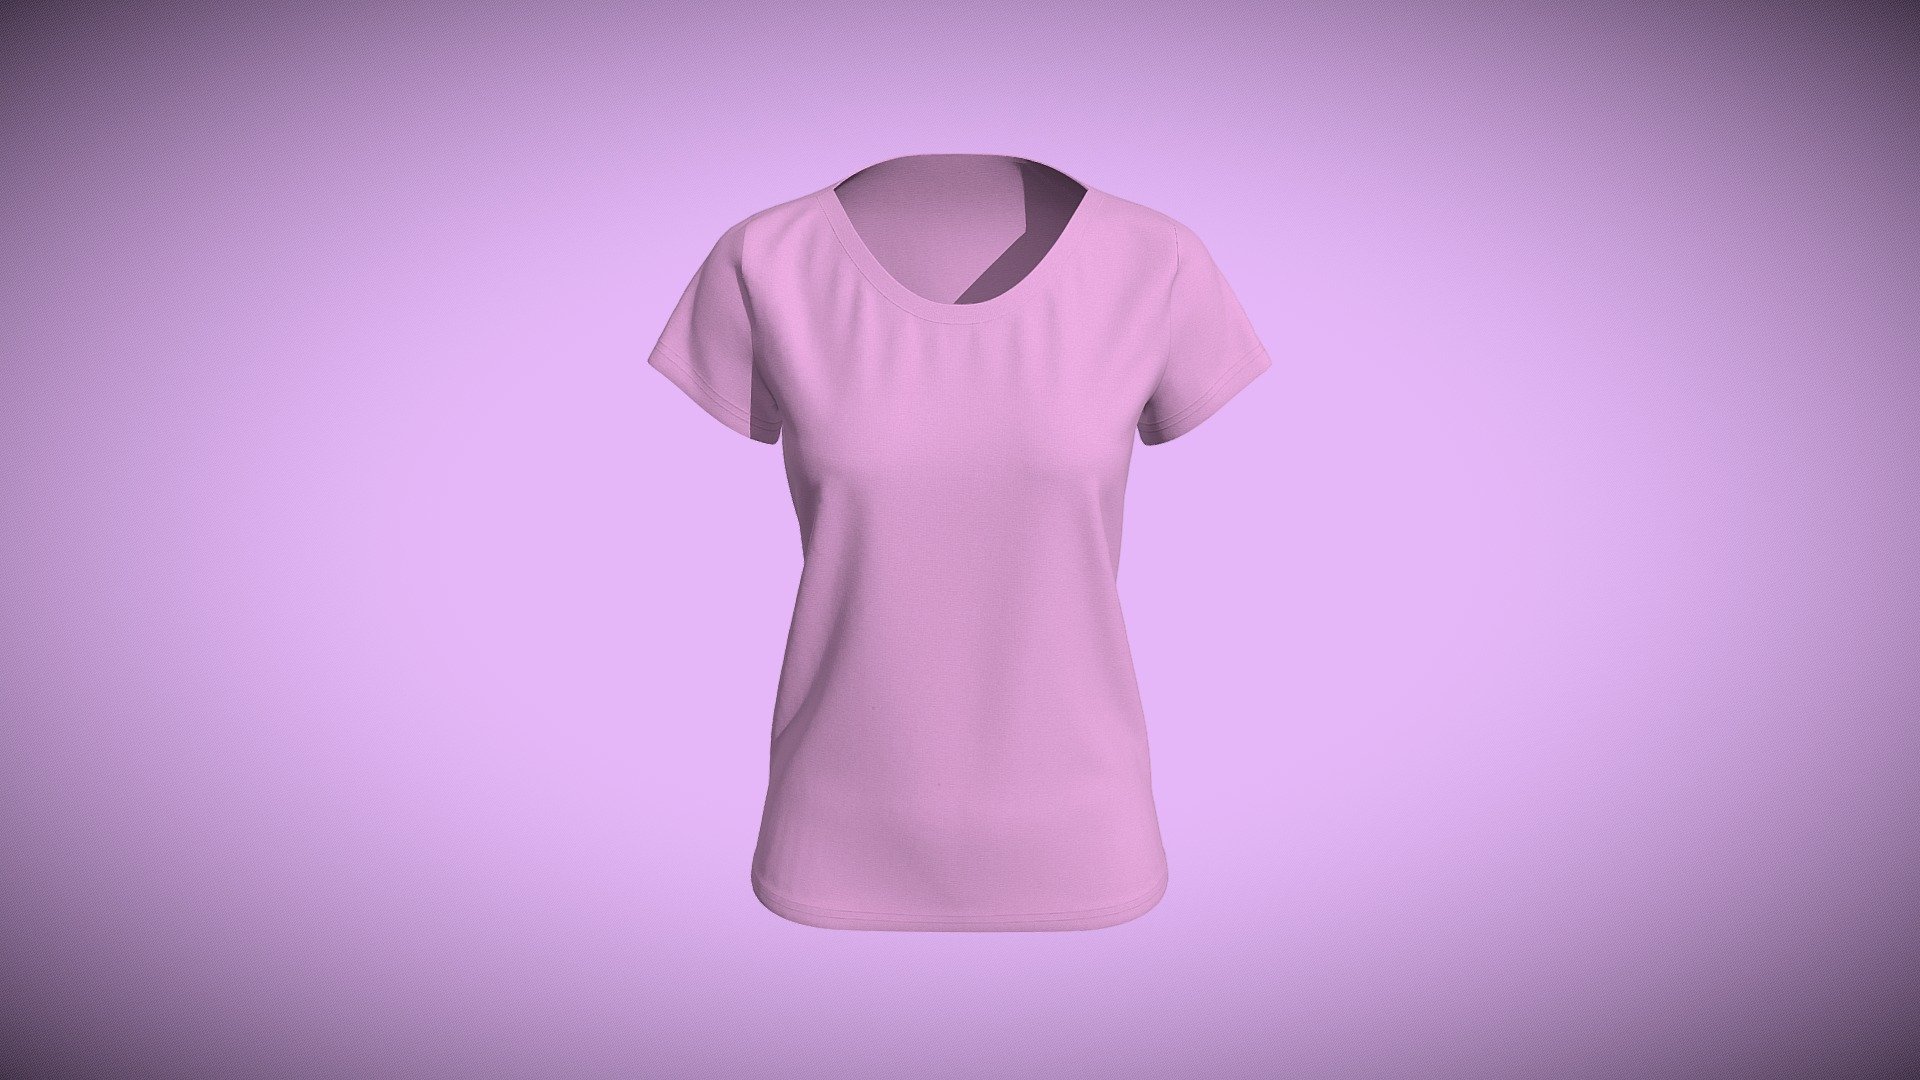 Cloth Title = Leaf Neck Women Tee Design 

SKU = DG100028 

Category = Women 

Product Type = Tee 

Cloth Length = Regular 

Body Fit = Regular Fit 

Occasion = Casual 
 
Sleeve Style = Set In Sleeve 


Our Services:

3D Apparel Design.

OBJ,FBX,GLTF Making with High/Low Poly.

Fabric Digitalization.

Mockup making.

3D Teck Pack.

Pattern Making.

2D Illustration.

Cloth Animation and 360 Spin Video.


Contact us:- 

Email: info@digitalfashionwear.com 

Website: https://digitalfashionwear.com 

WhatsApp No: +8801759350445 


We designed all the types of cloth specially focused on product visualization, e-commerce, fitting, and production. 

We will design: 

T-shirts 

Polo shirts 

Hoodies 

Sweatshirt 

Jackets 

Shirts 

TankTops 

Trousers 

Bras 

Underwear 

Blazer 

Aprons 

Leggings 

and All Fashion items. 





Our goal is to make sure what we provide you, meets your demand 3d model